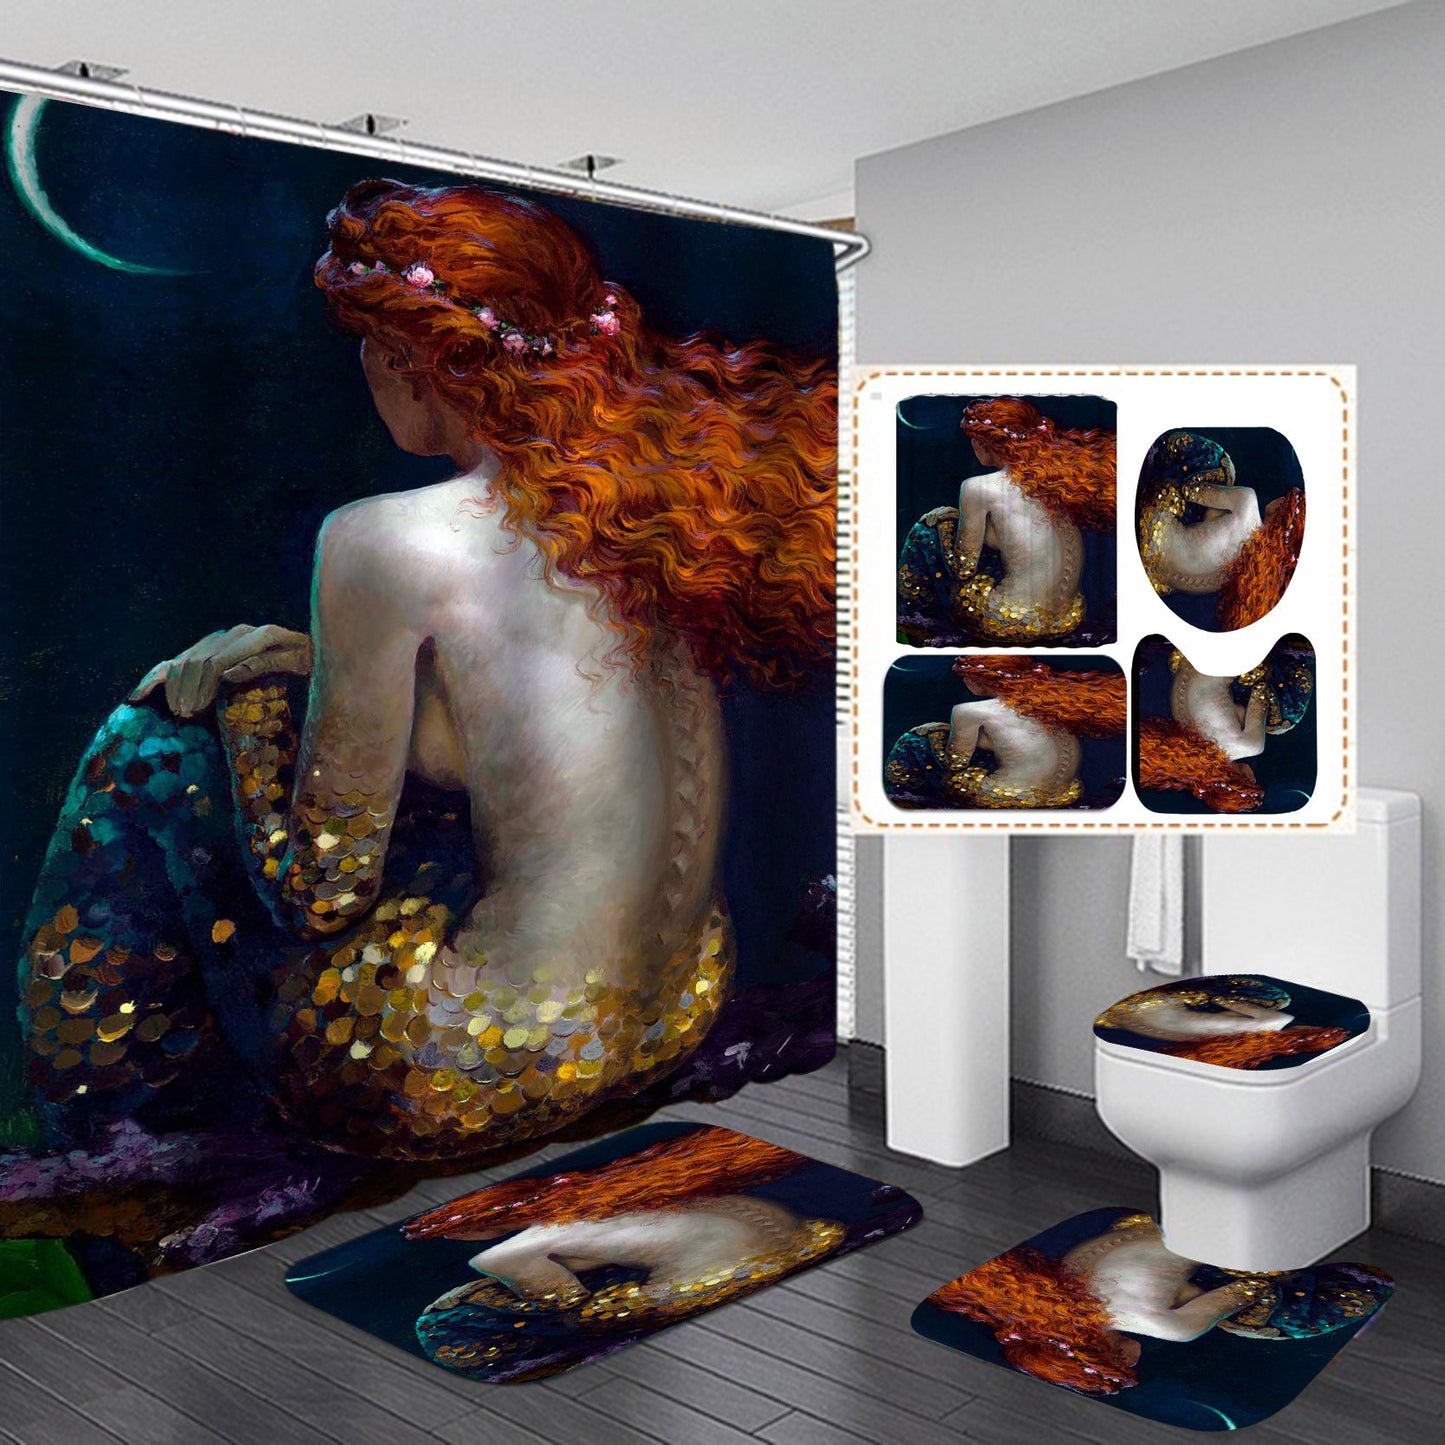 Cartoon Mermaid Design Shower Curtain Bathroom SetsNon-Slip Toilet Lid Cover-Shower Curtain-180×180cm Shower Curtain Only-6-Free Shipping at meselling99